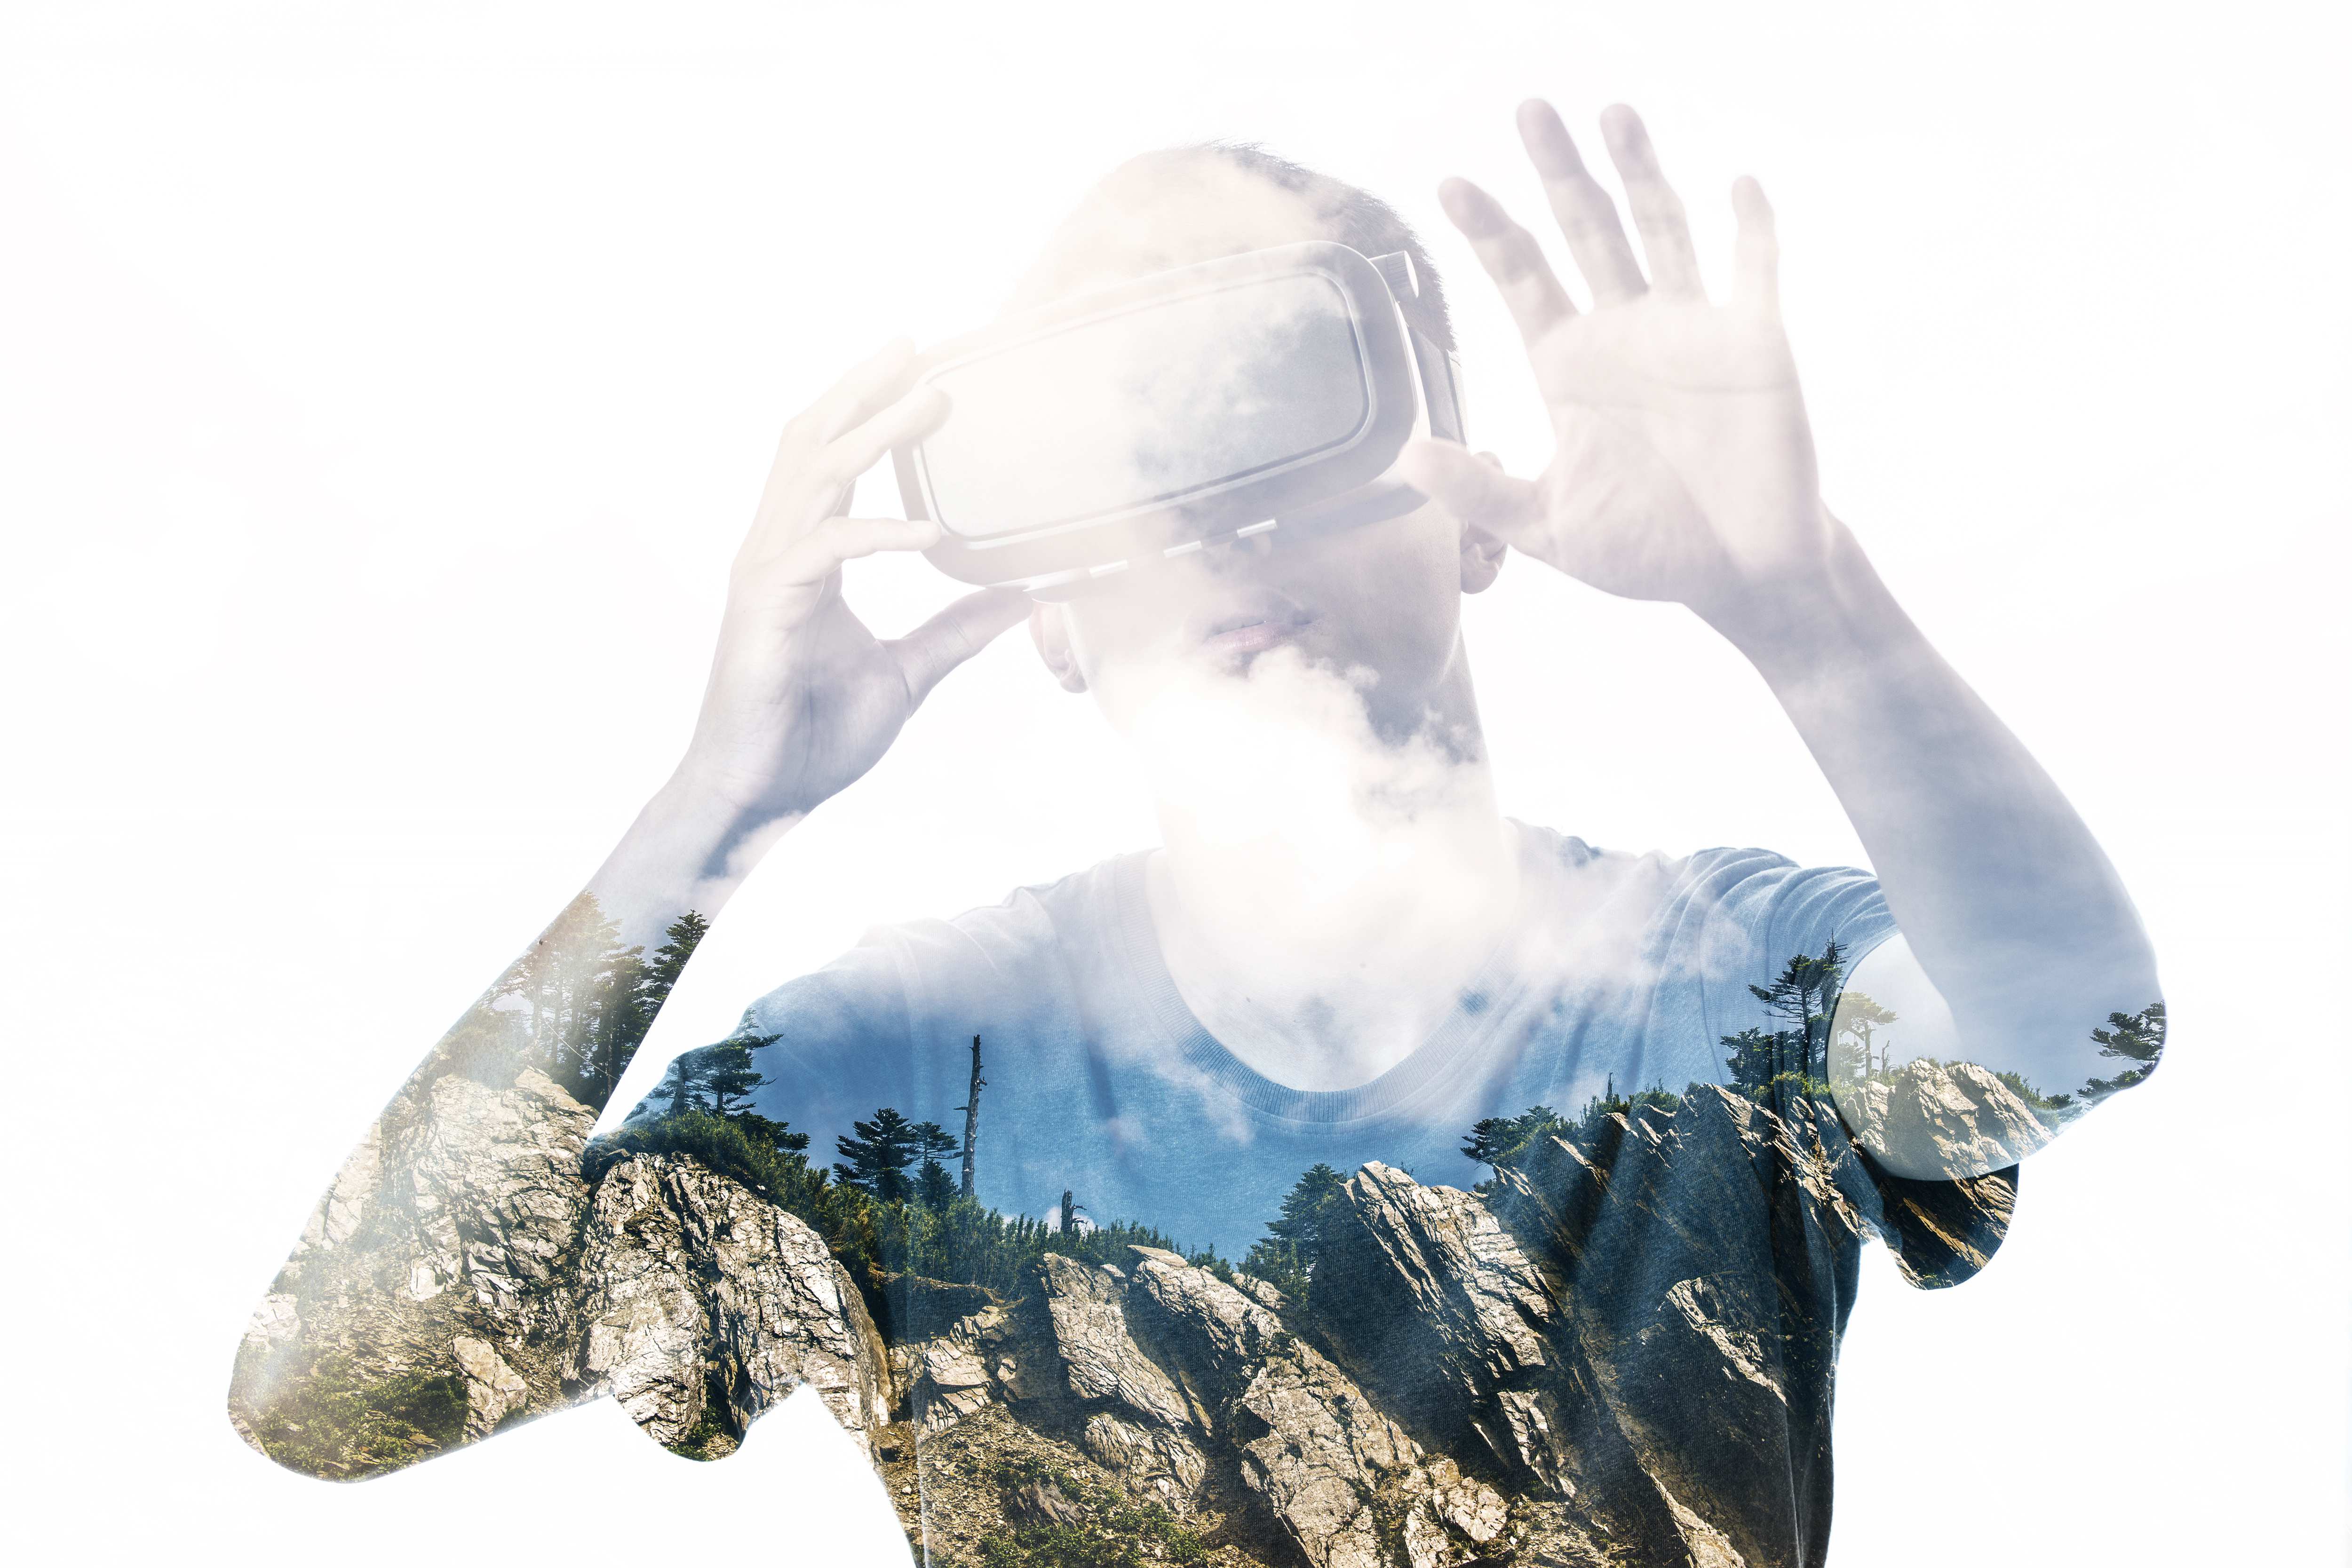 Double exposure image of man experiencing virtual reality and the metaverse